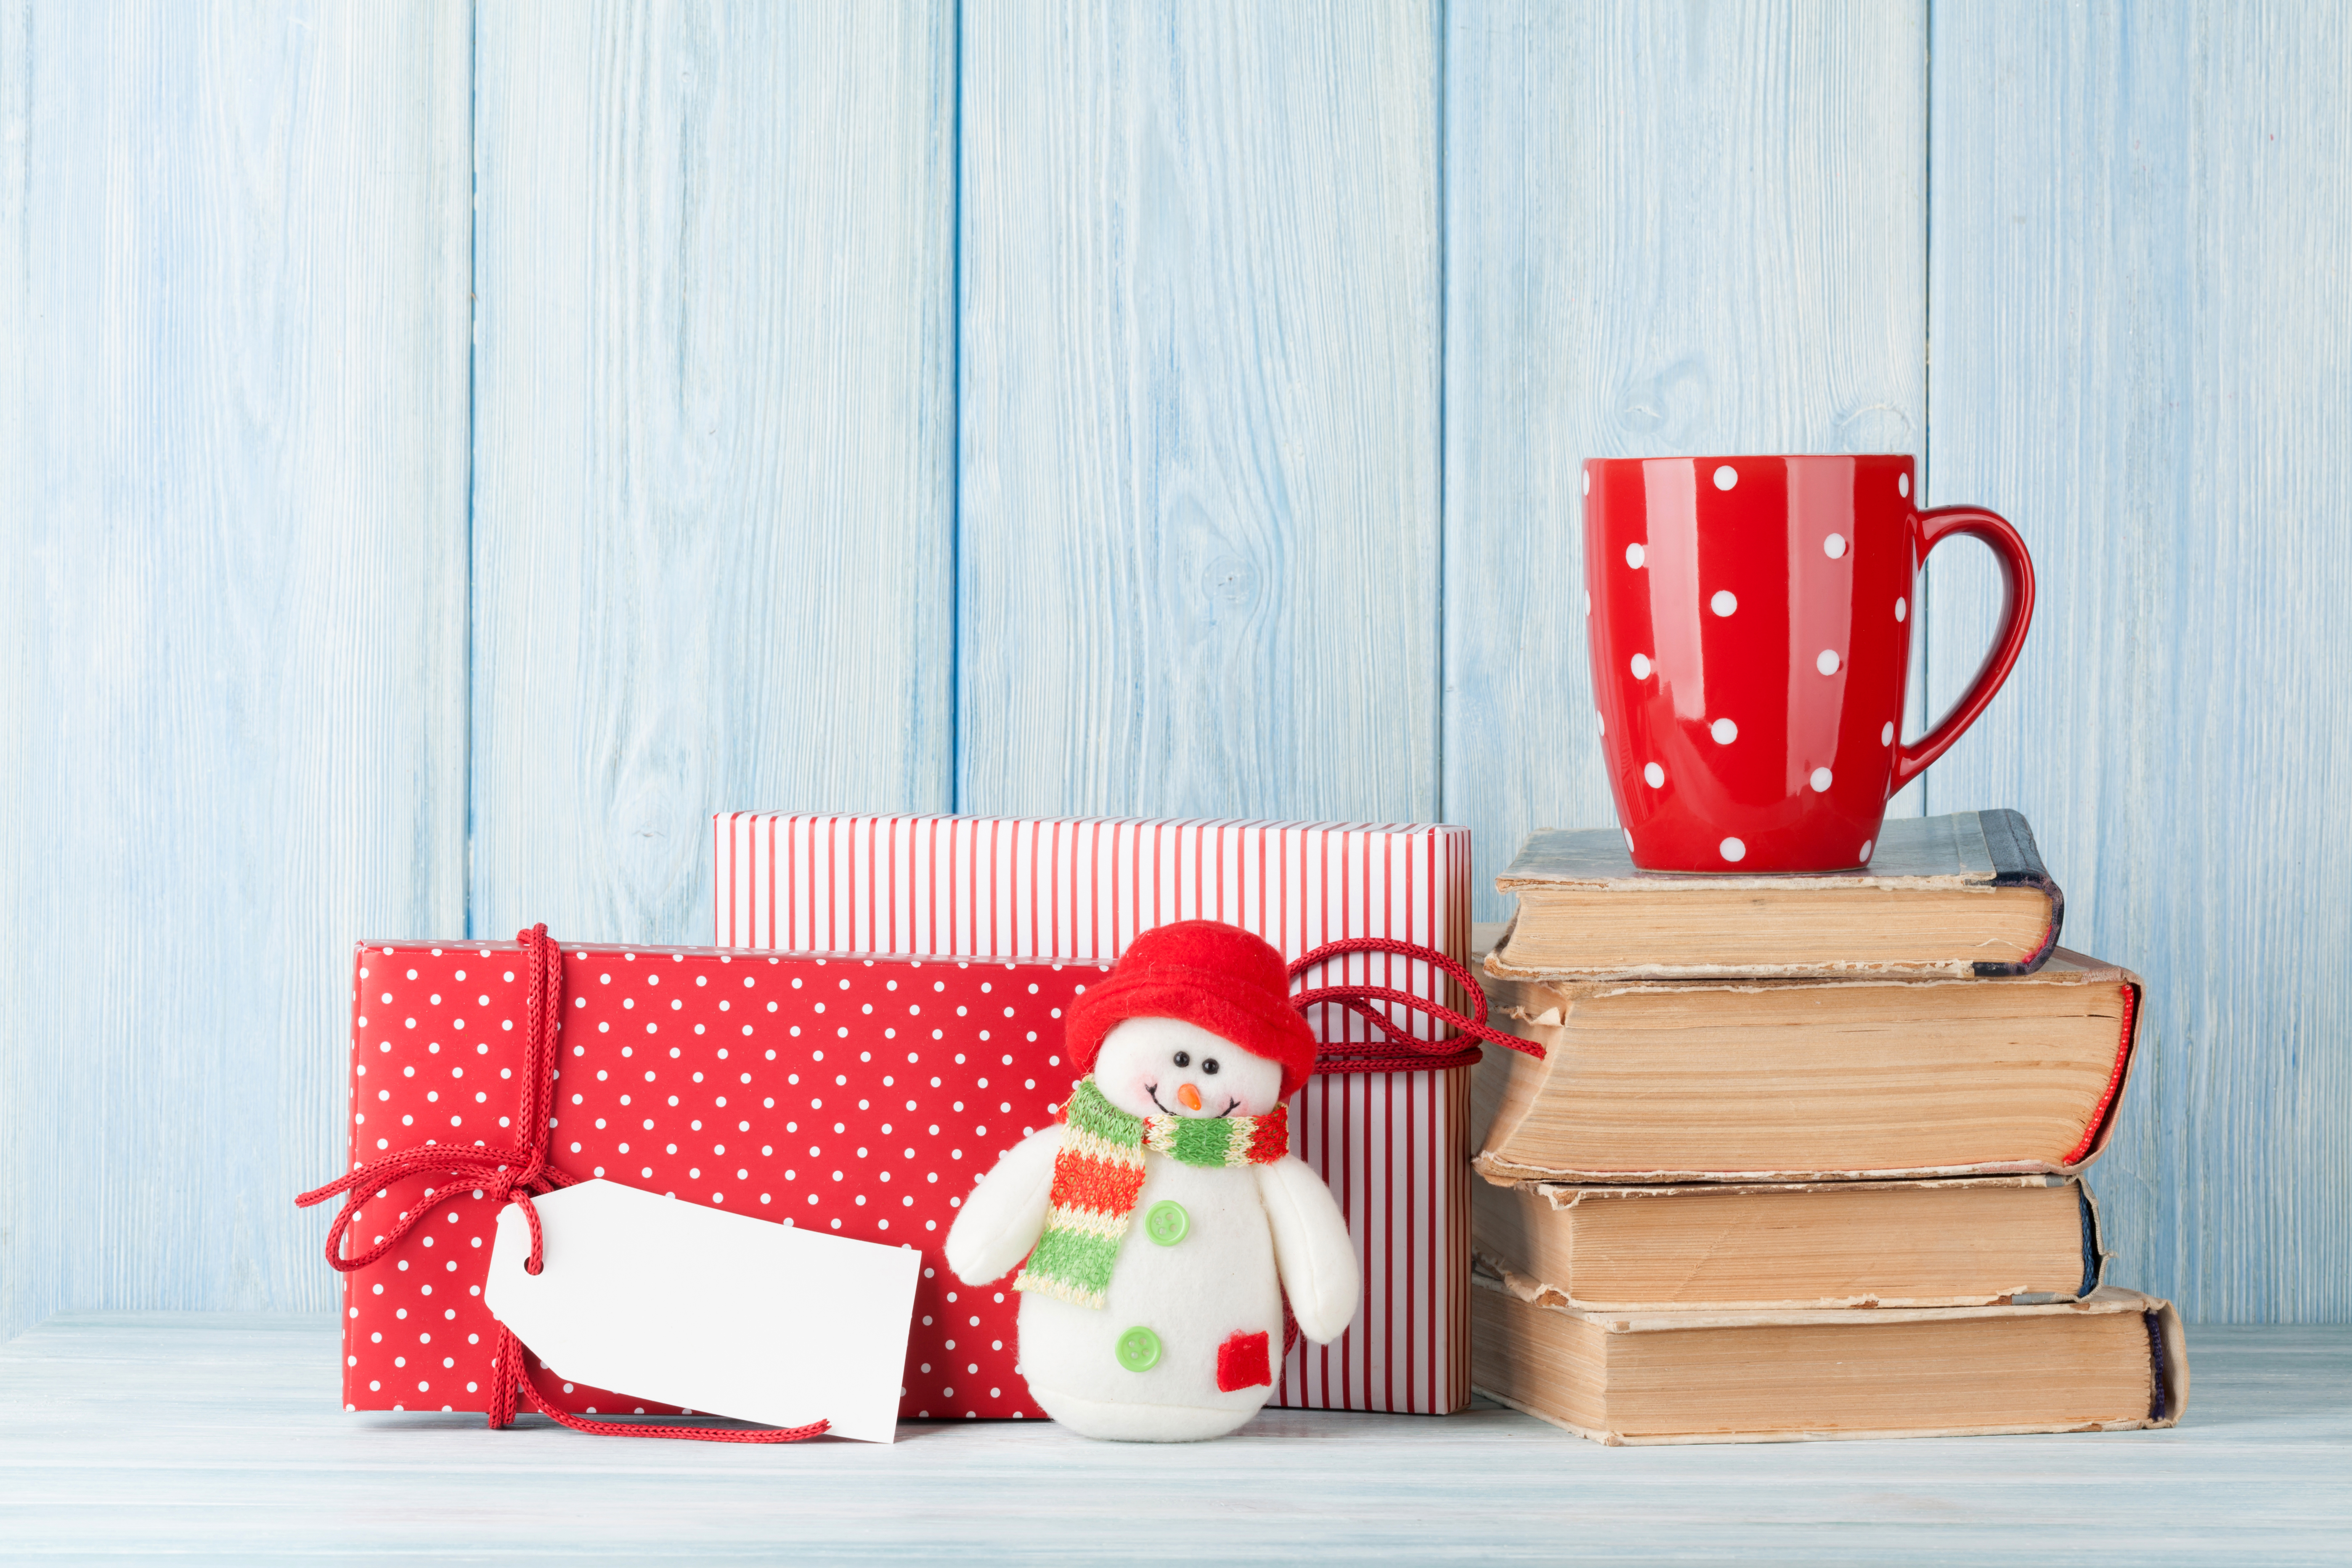 Amazing Christmas Traditions Around the World to Experience During Your Family Vacation - Books to Exchange on Christmas Eve in Iceland